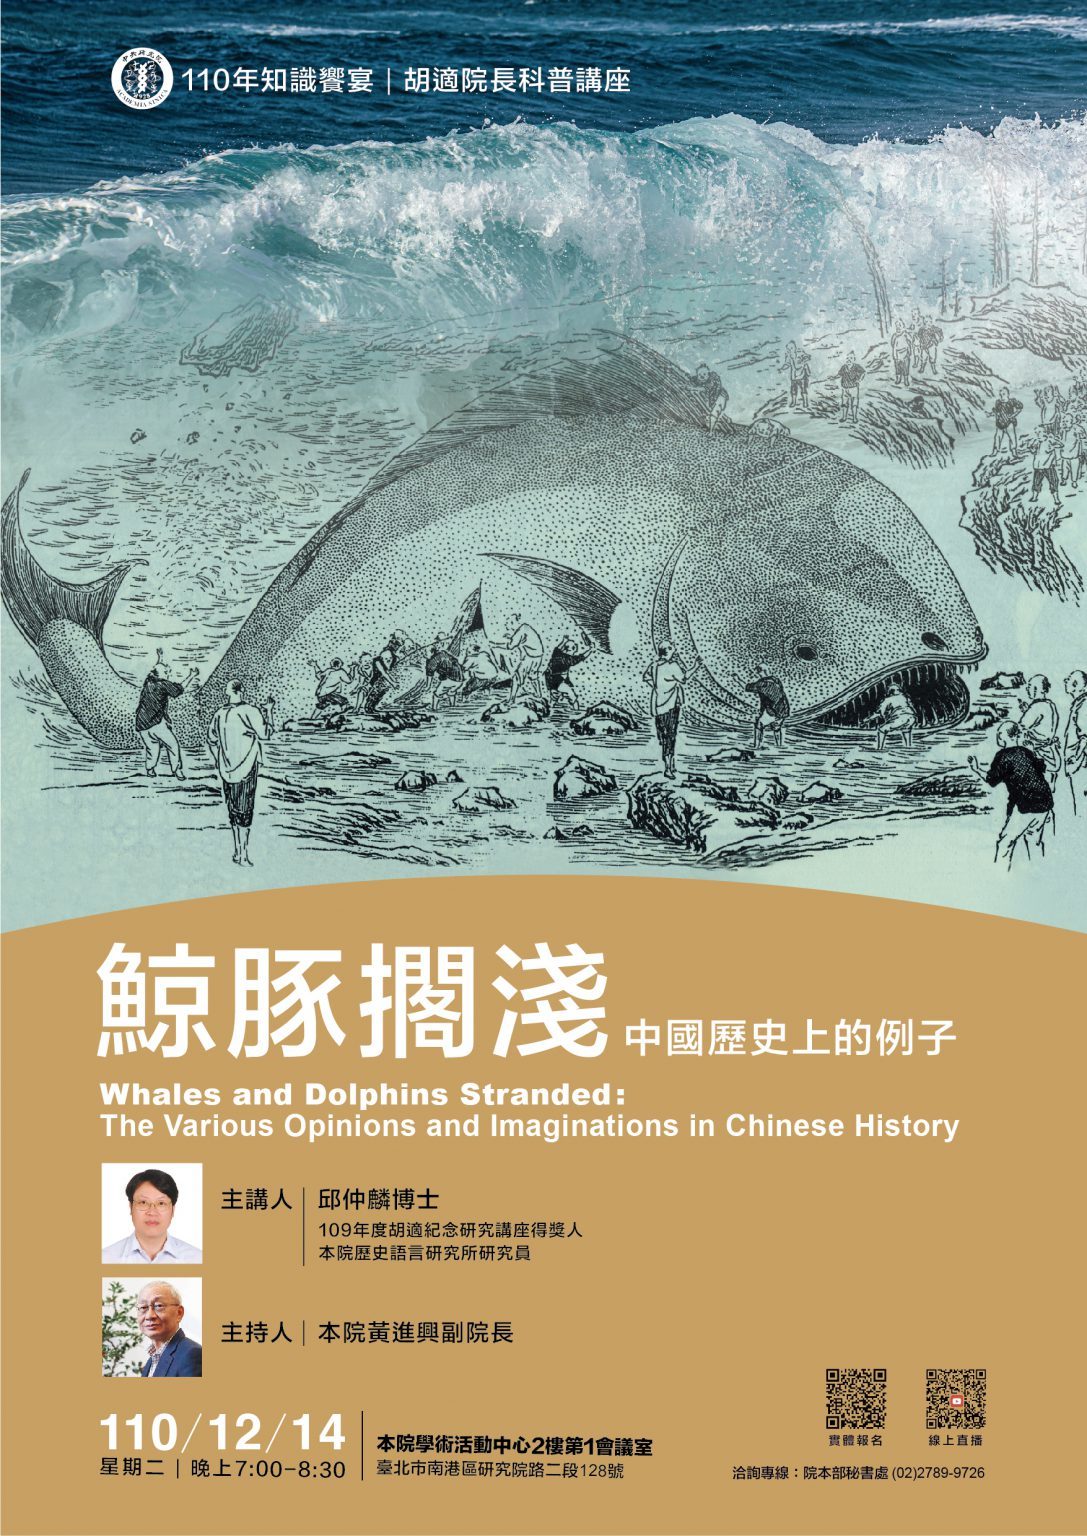 https://newsletter.sinica.edu.tw/en/knowledge-feast-popular-science-lecture-in-honor-of-late-president-hu-shih-whales-and-dolphins-stranded-the-various-opinions-and-imaginations-in-chinese-history/